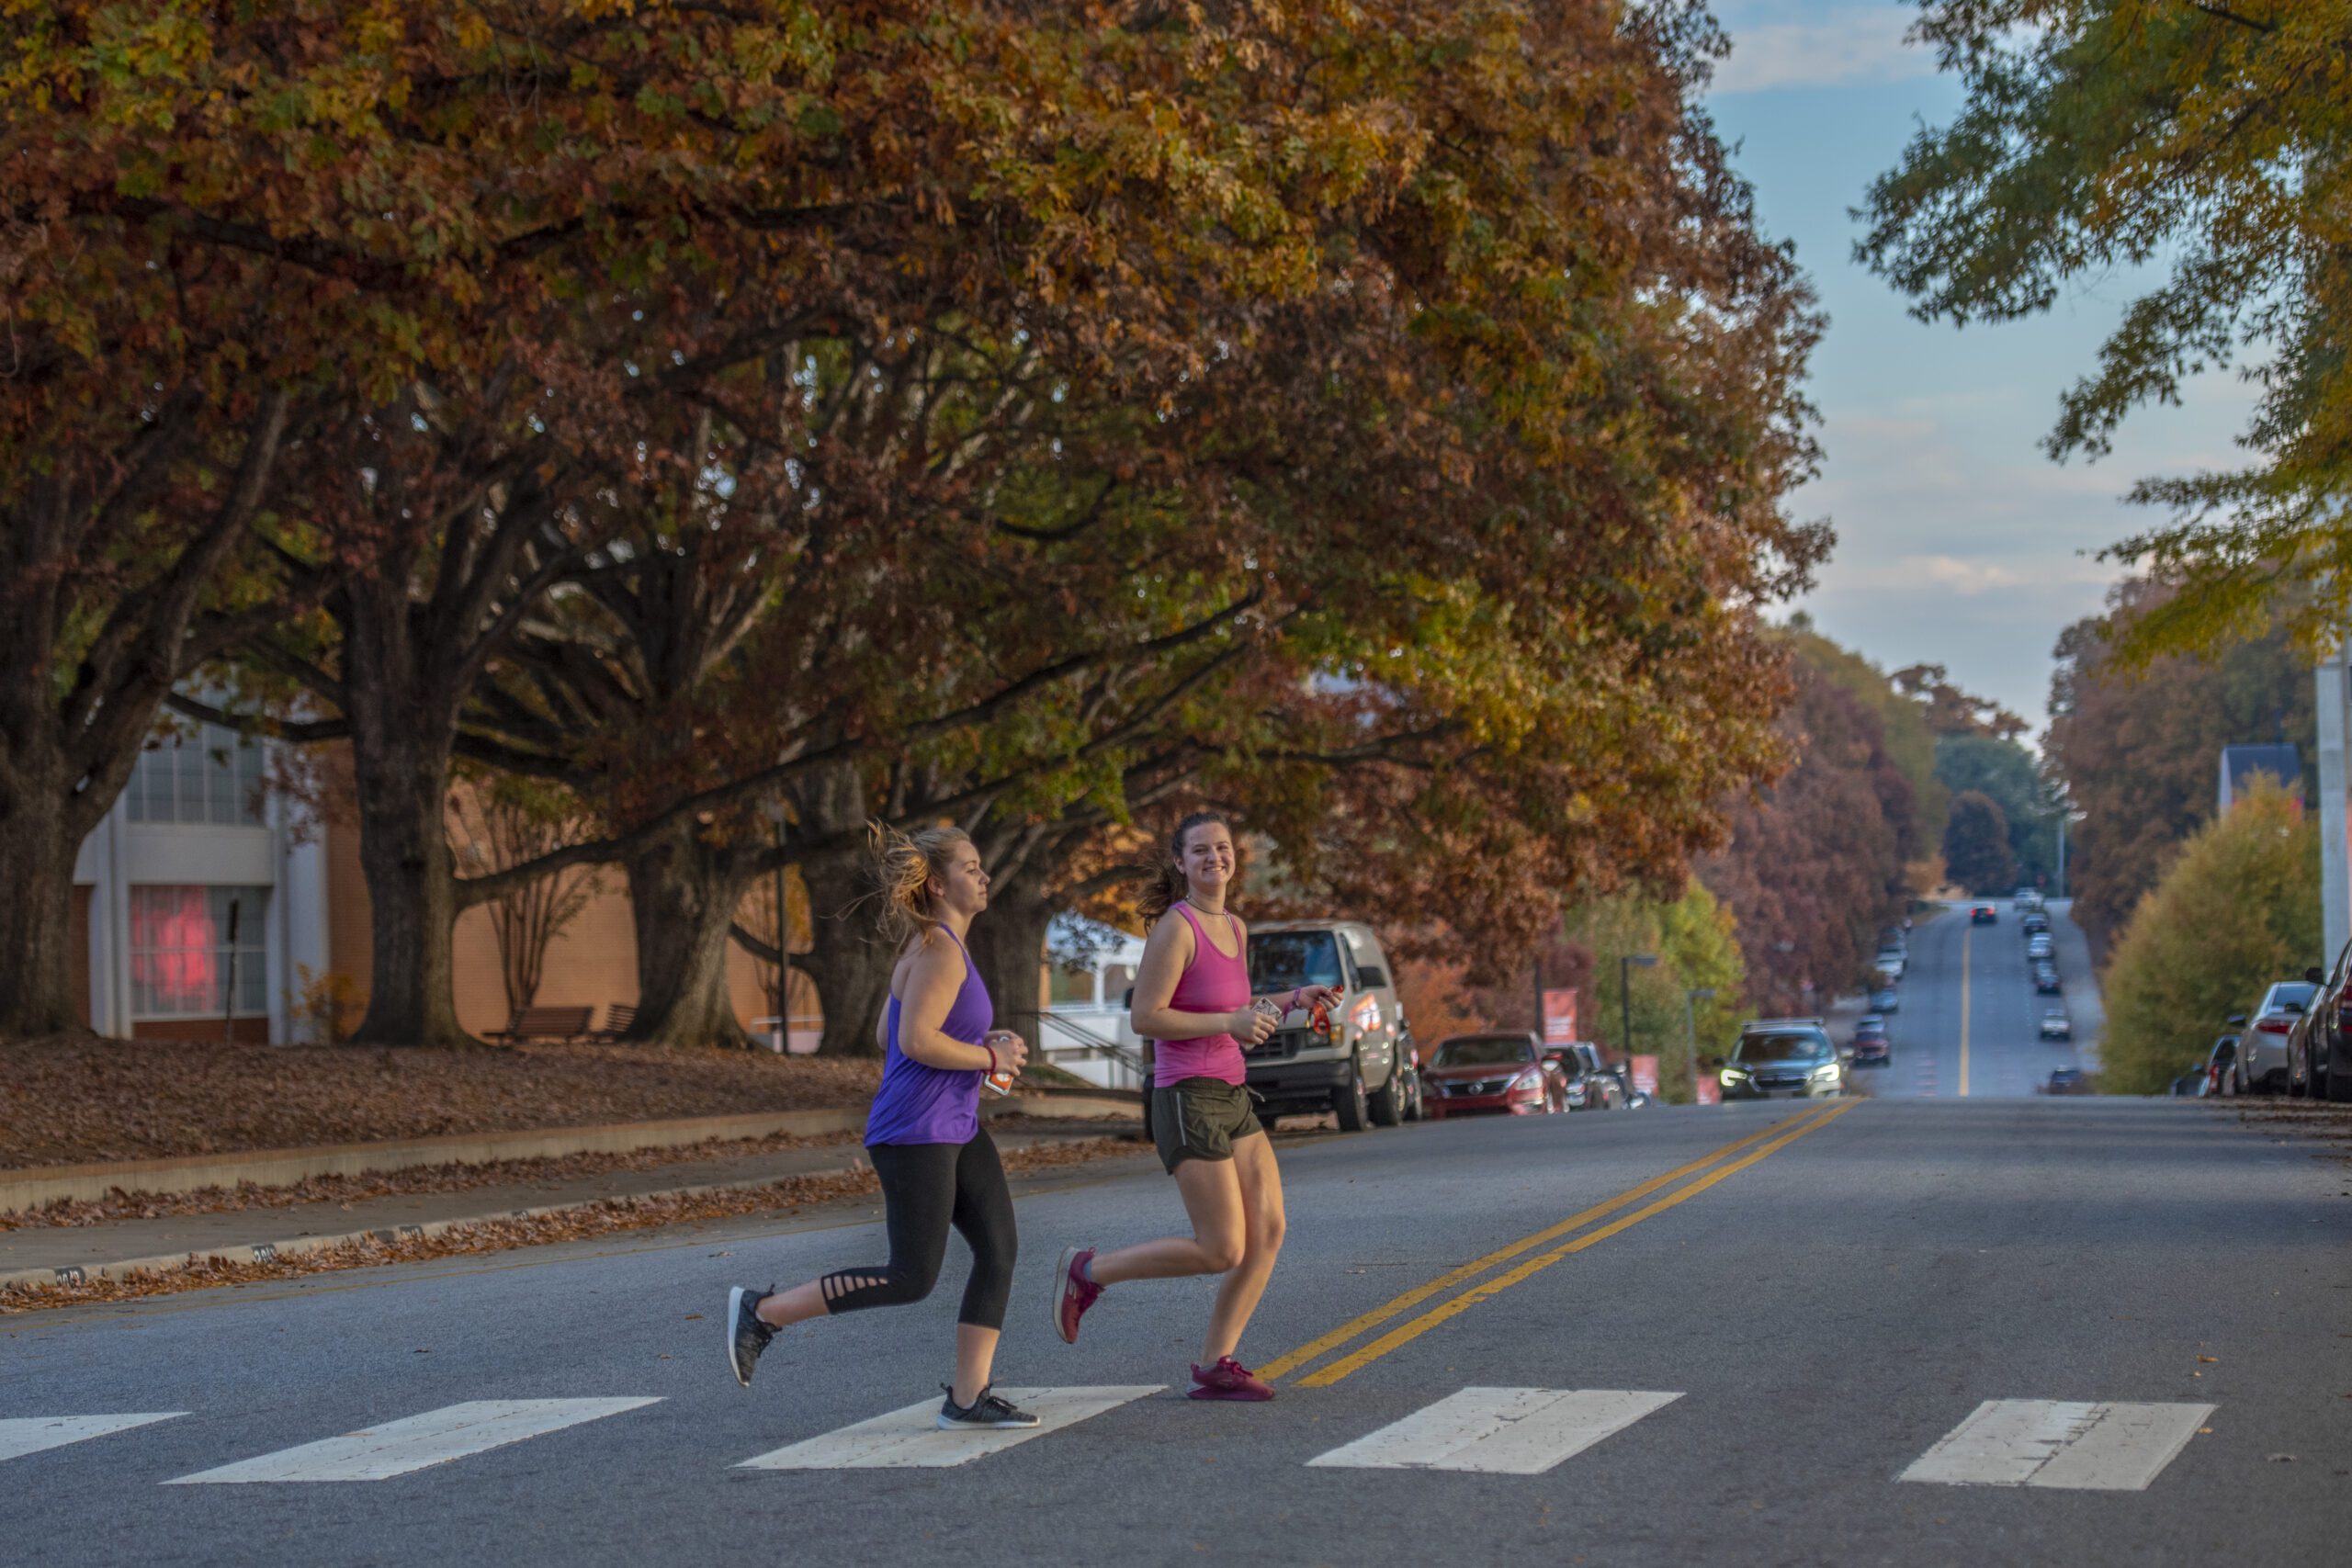 Two female runners jog over a crosswalk with fall trees and lit buildings behind them, indicating morning.